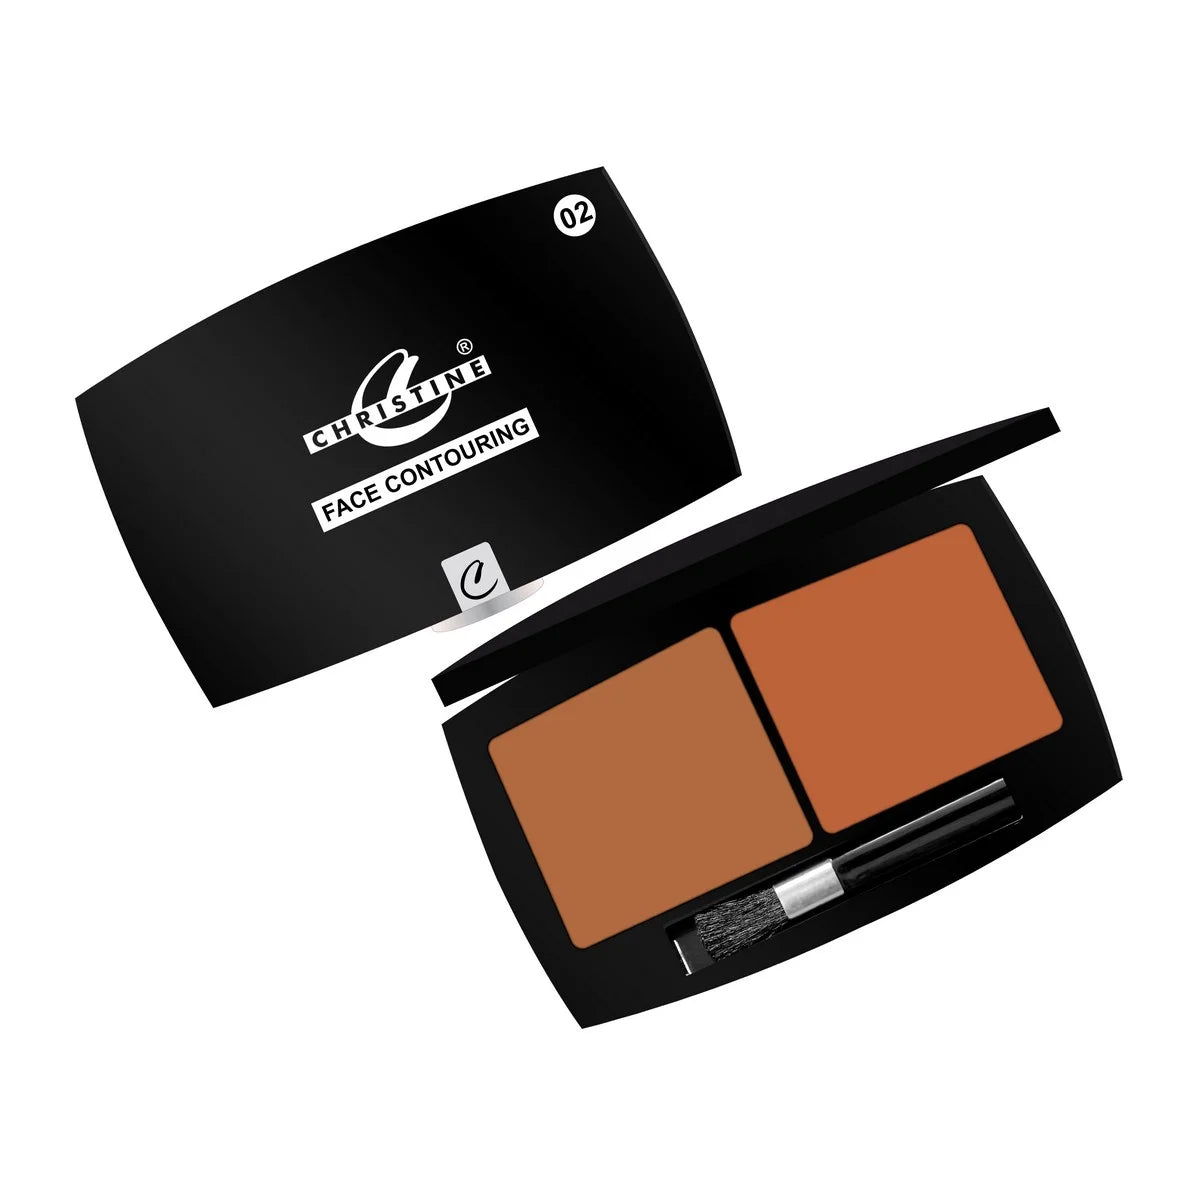 Christine Twin Face Contouring Kit